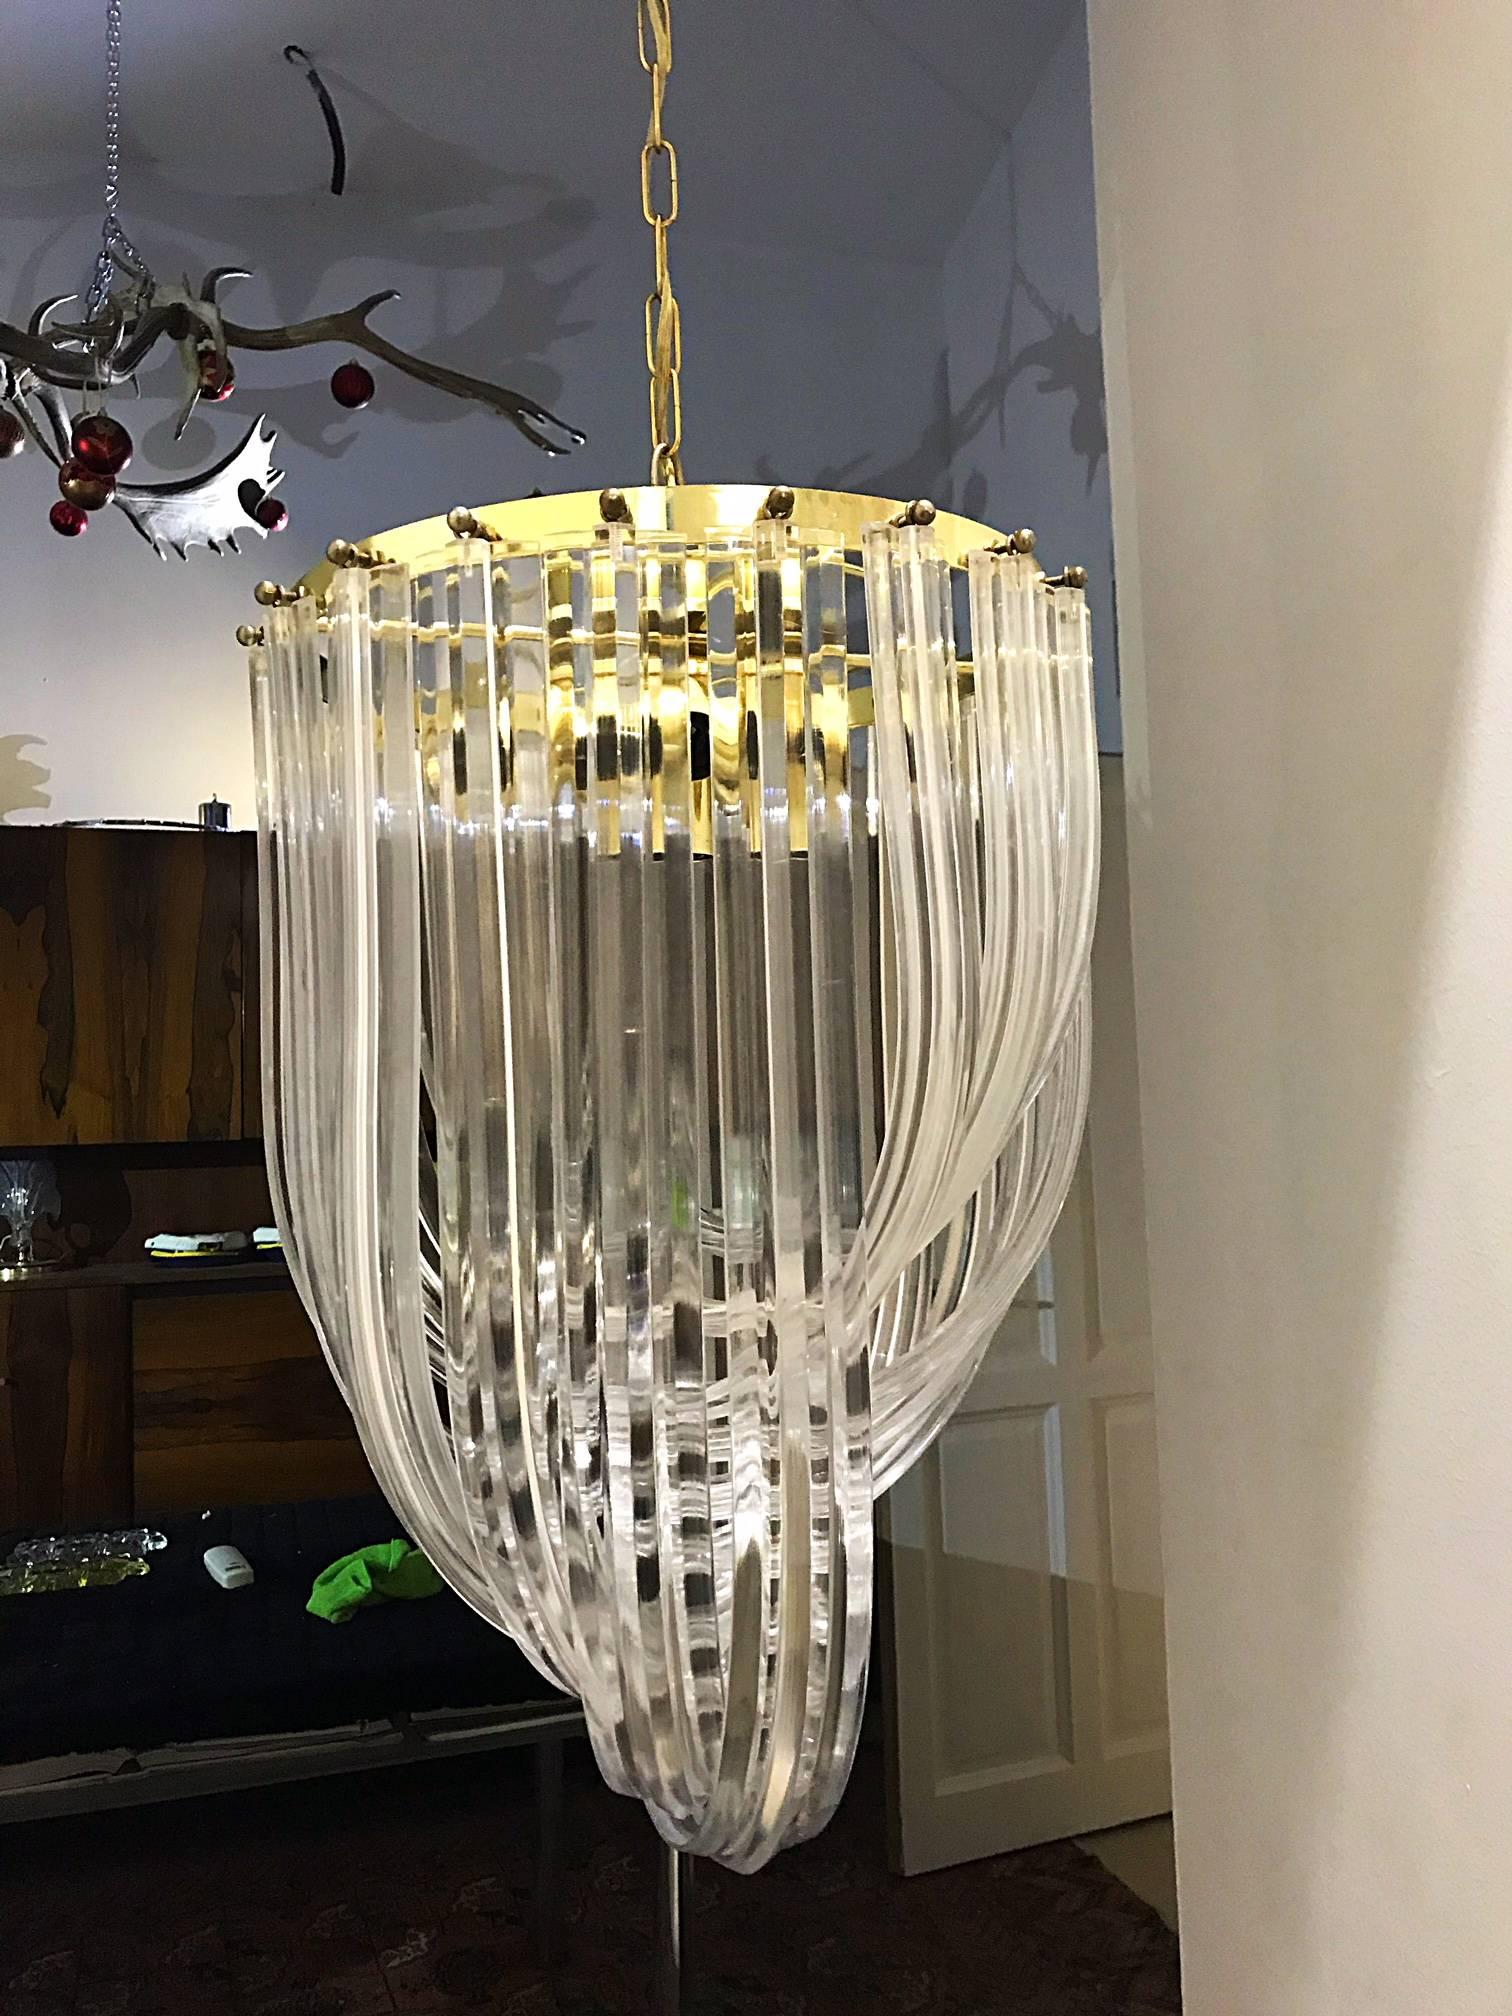 Carlo Nason model Interlocking layers of molded Lucite loops; gold round metal structure. Can hand as chandelier from matching chain or as a flush mounted fixture. Cultivates unexpected and exceptional lighting, furniture and design. Measures: 130